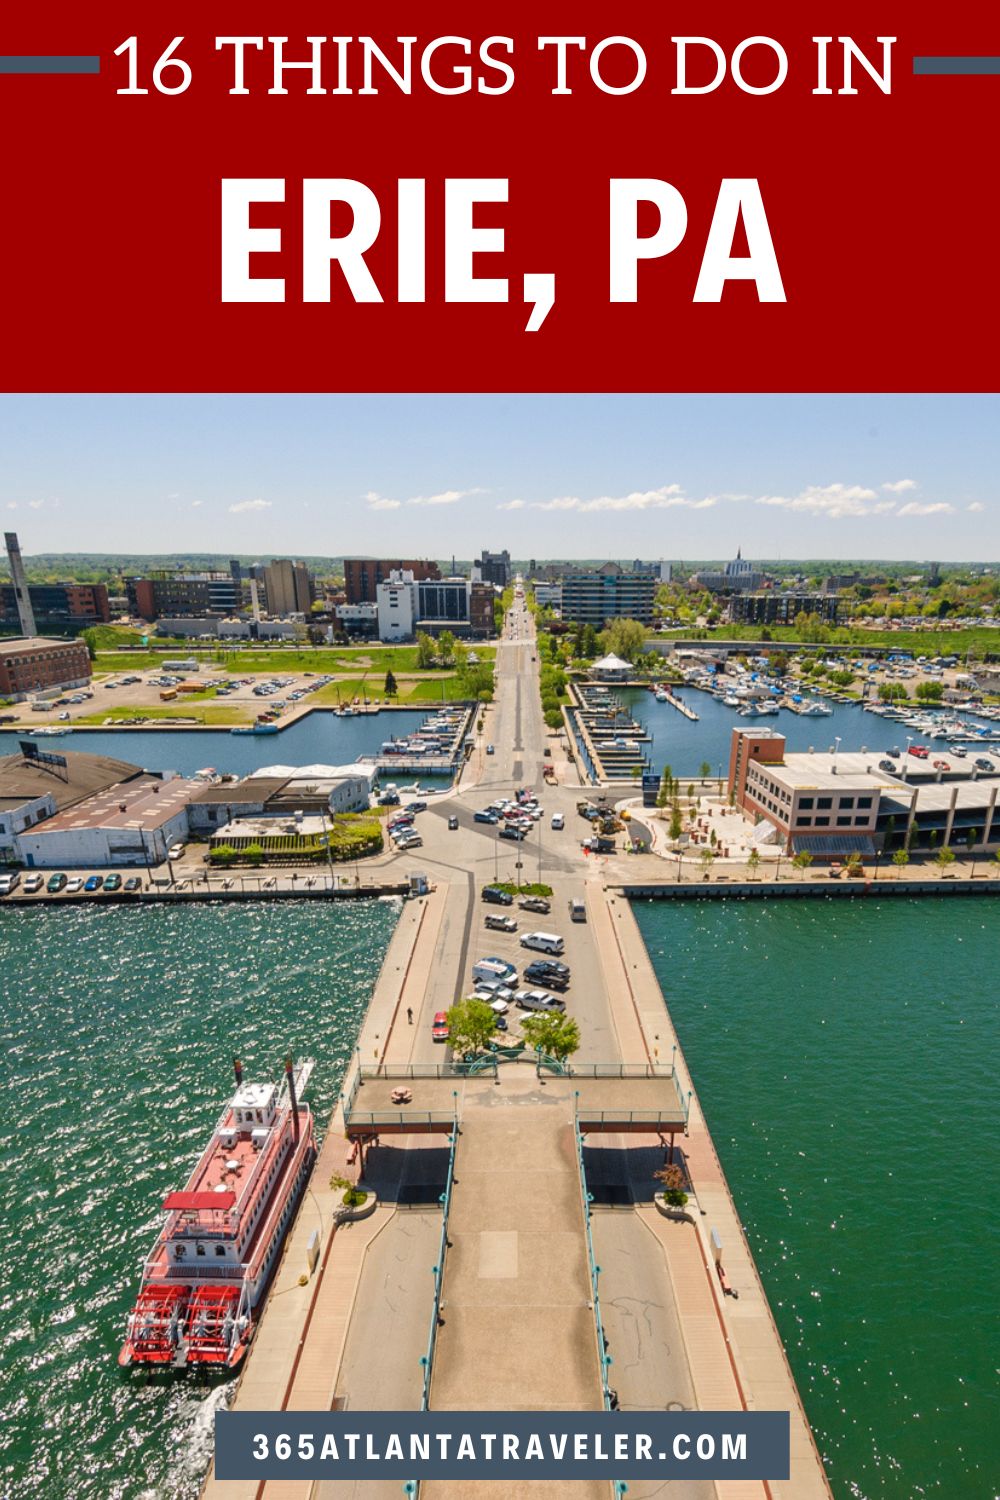 16 FUN THINGS TO DO IN ERIE PA EVERYONE WILL LOVE